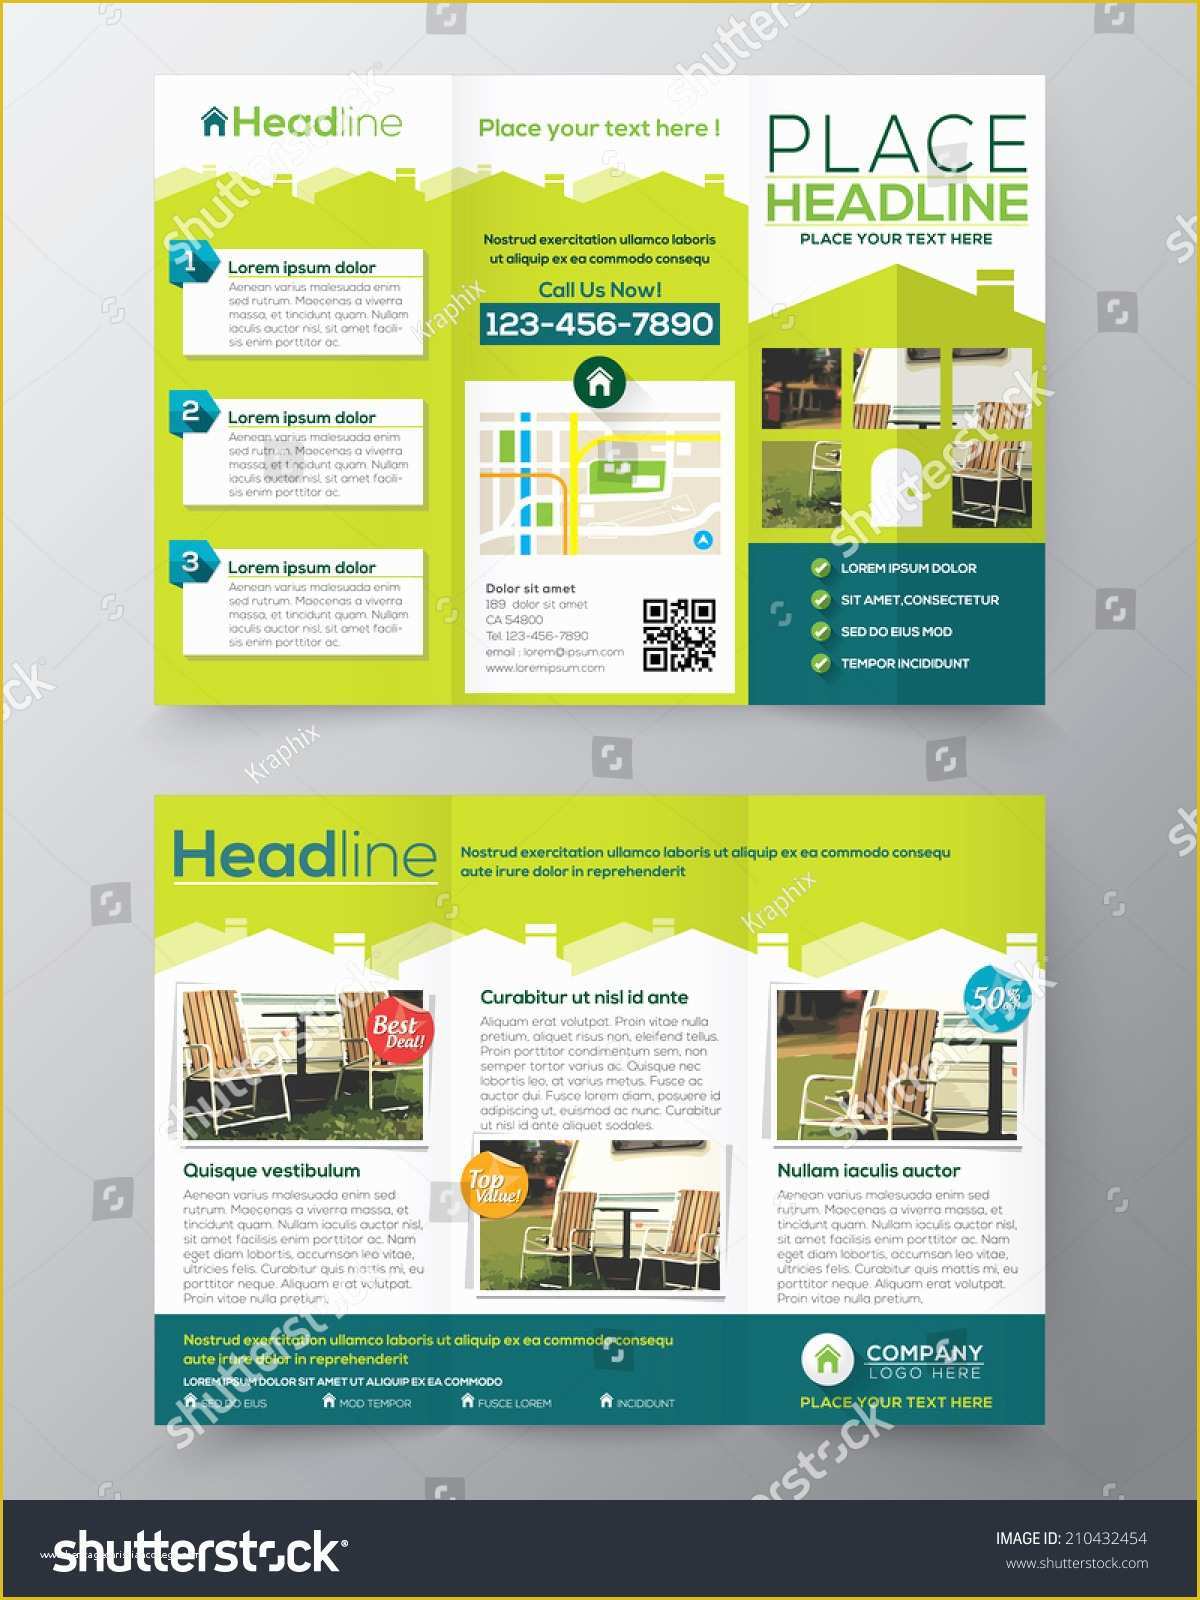 Free Templates for Flyers and Brochures Of Real Estate Brochure Flyer Design Vector Template In A4